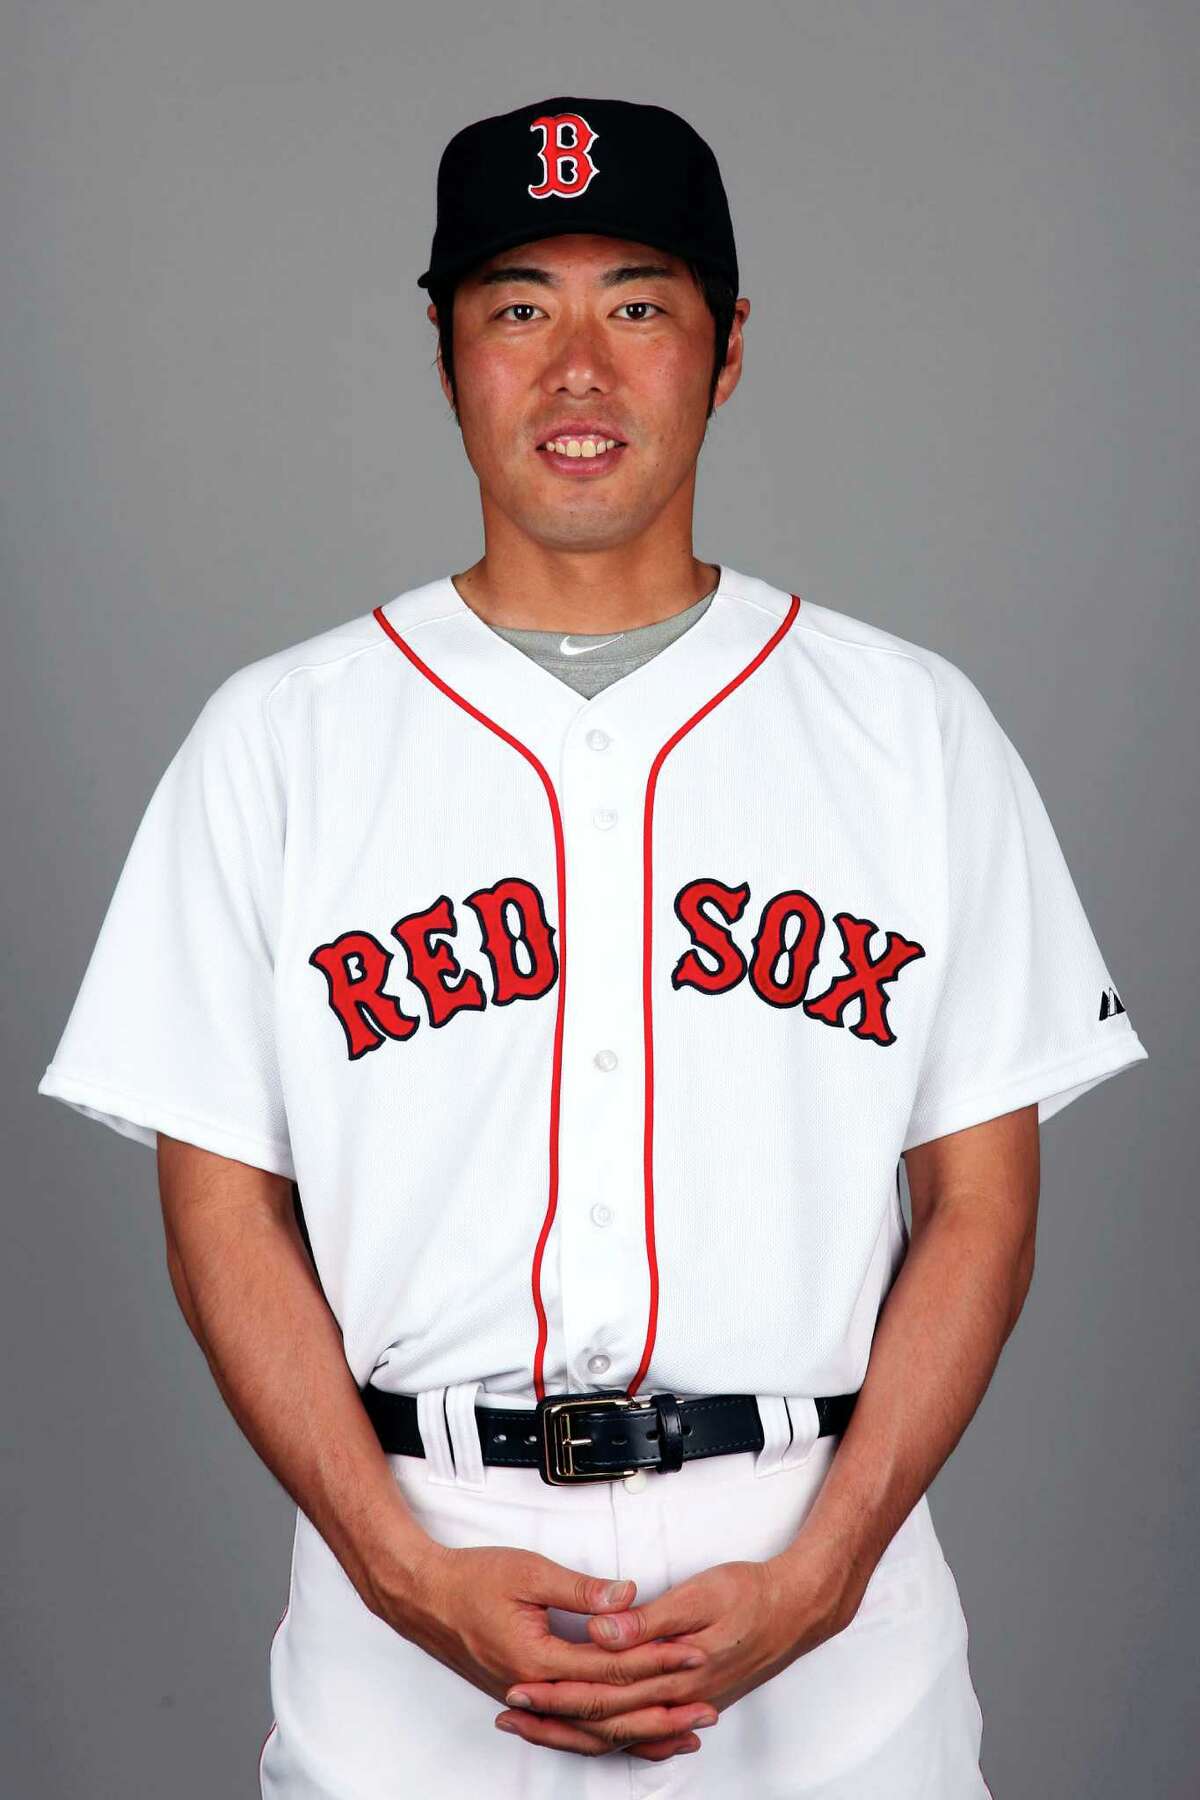 Koji Uehara Boston Red Sox 2014 MLB photo FORT MYERS, FL - FEBRUARY 23: Koji Uehara #19 of the Boston Red Sox poses during Photo Day on Sunday, February 23, 2013 at JetBlue Park in Fort Myers, Florida. (Photo by Eliot J. Schechter/MLB Photos via Getty Images) *** Local Caption *** Koji Uehara